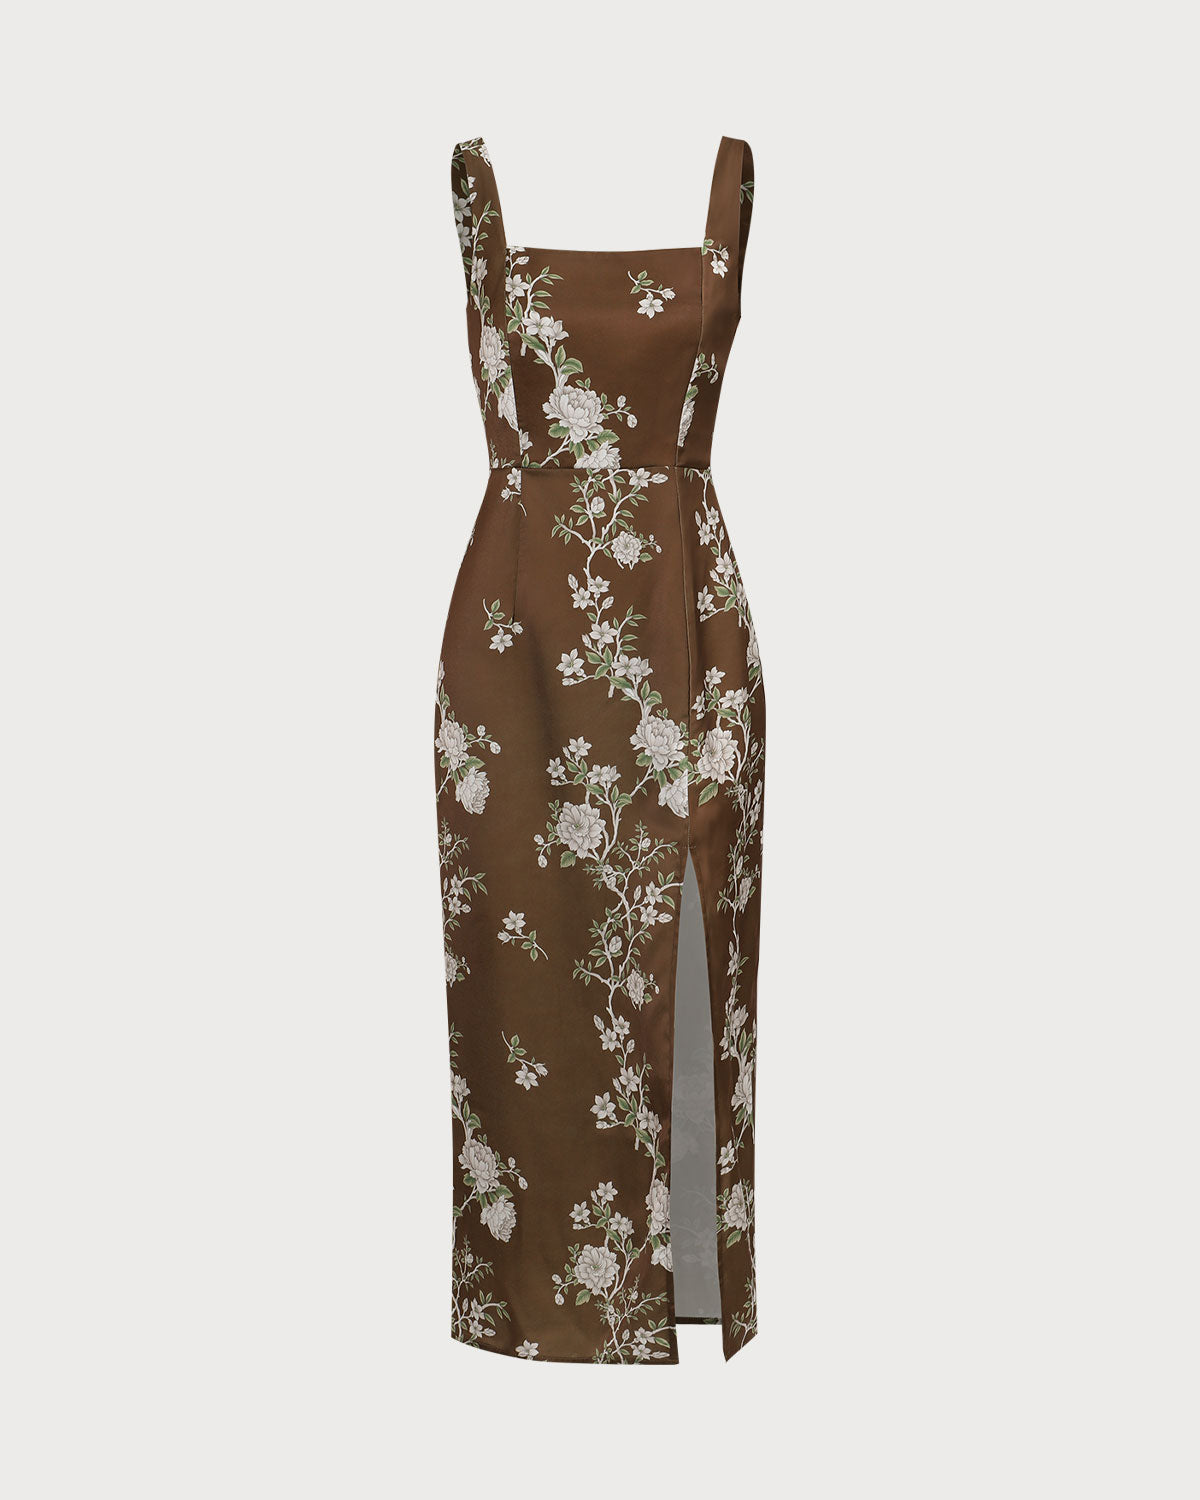 The Brown Square Neck Floral Satin Maxi Dress